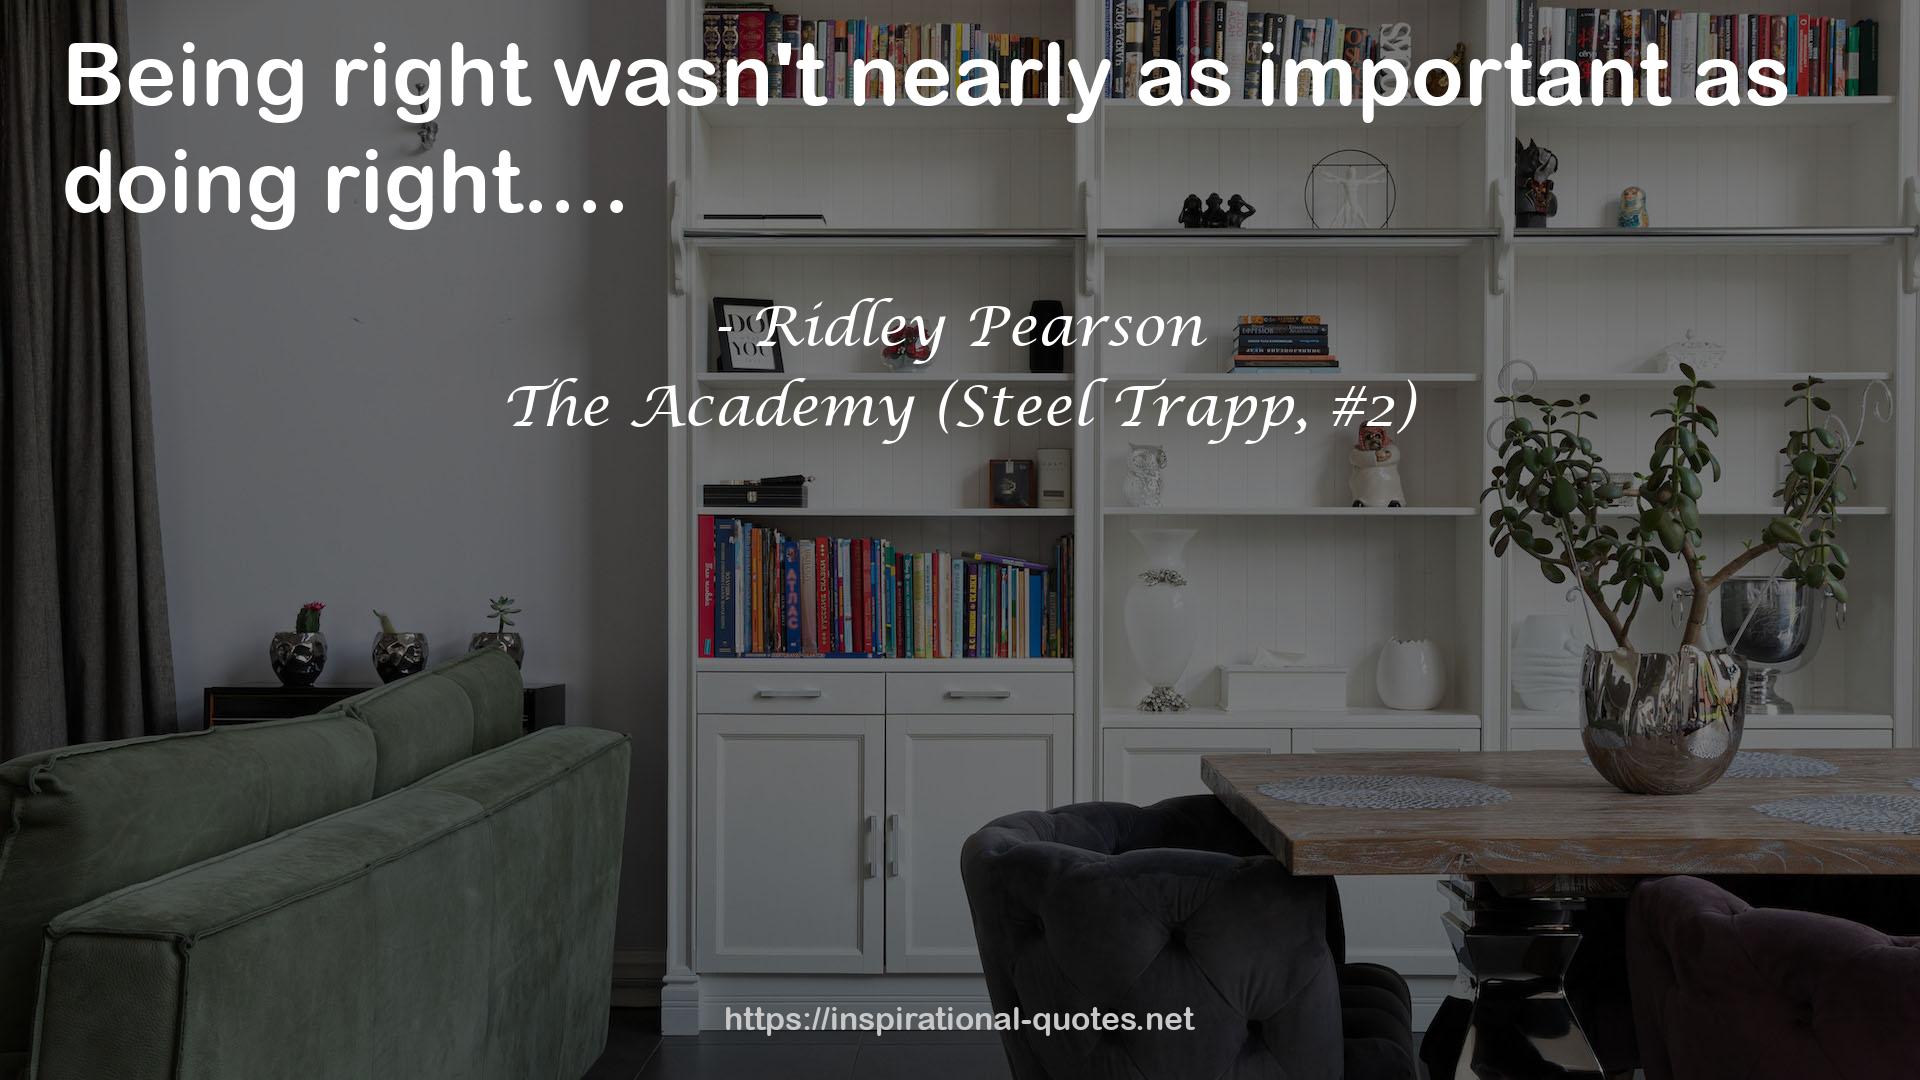 The Academy (Steel Trapp, #2) QUOTES